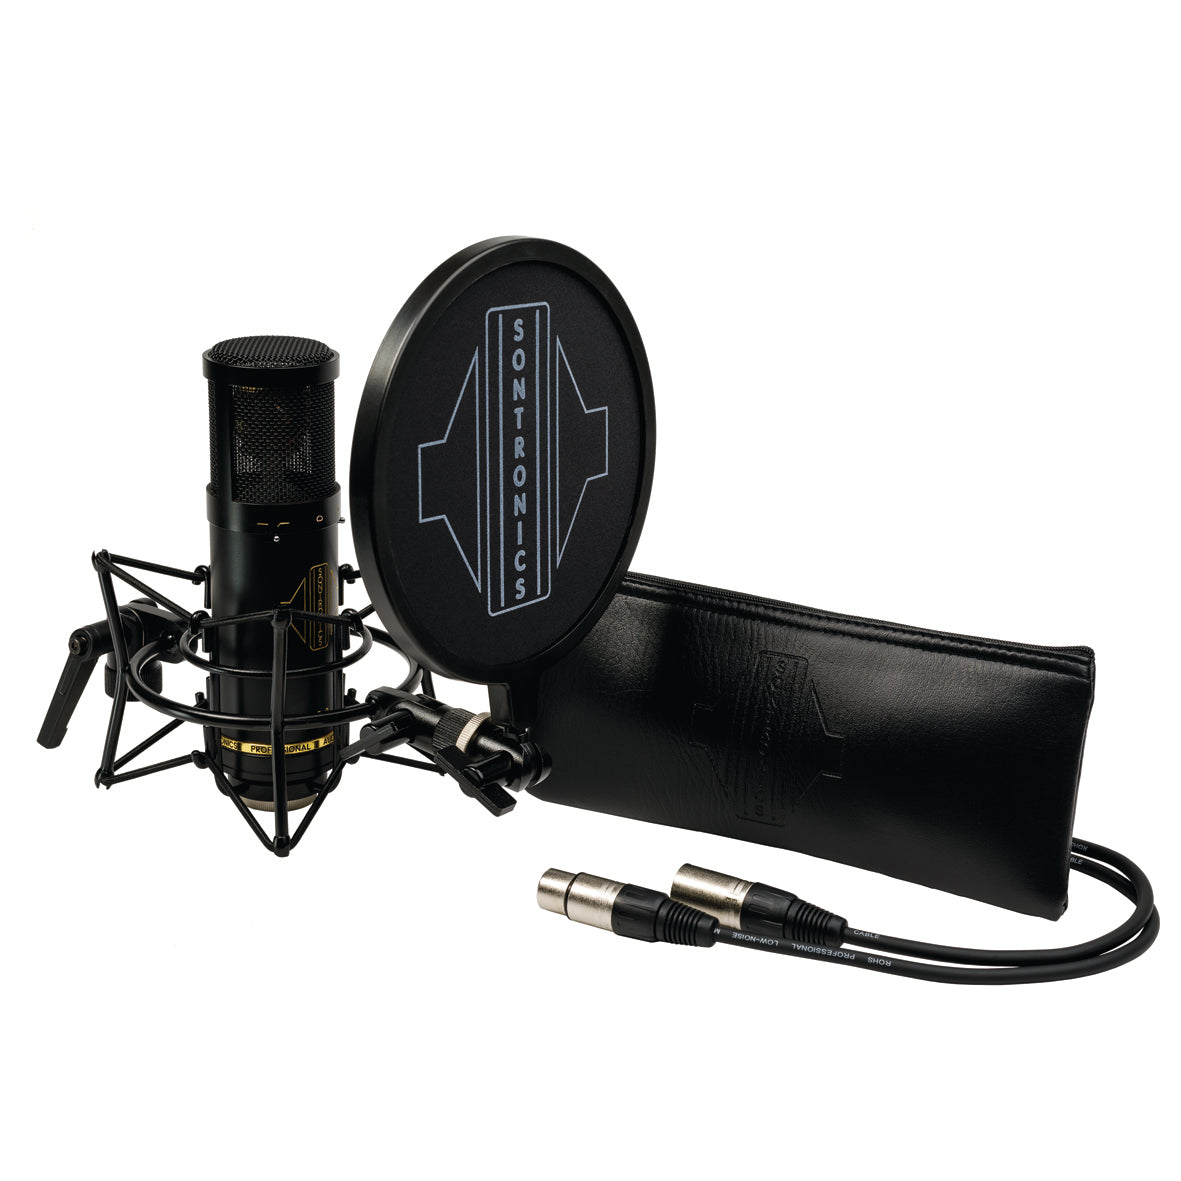 Image on white background of the contents of the Sontronics STC-2 Pack, from left to right: the black STC-2 microphone with gold lettering facing to the right and sitting in its spider shockmount with the black nylon-mesh popshield with a large white Sontronics logo in front of it; the long rectangular leather-look zip-up pouch with the embossed Sontronics logo on the front of it; and coming from behind the pouch, the black XLR cable showing the two silver XLR connectors